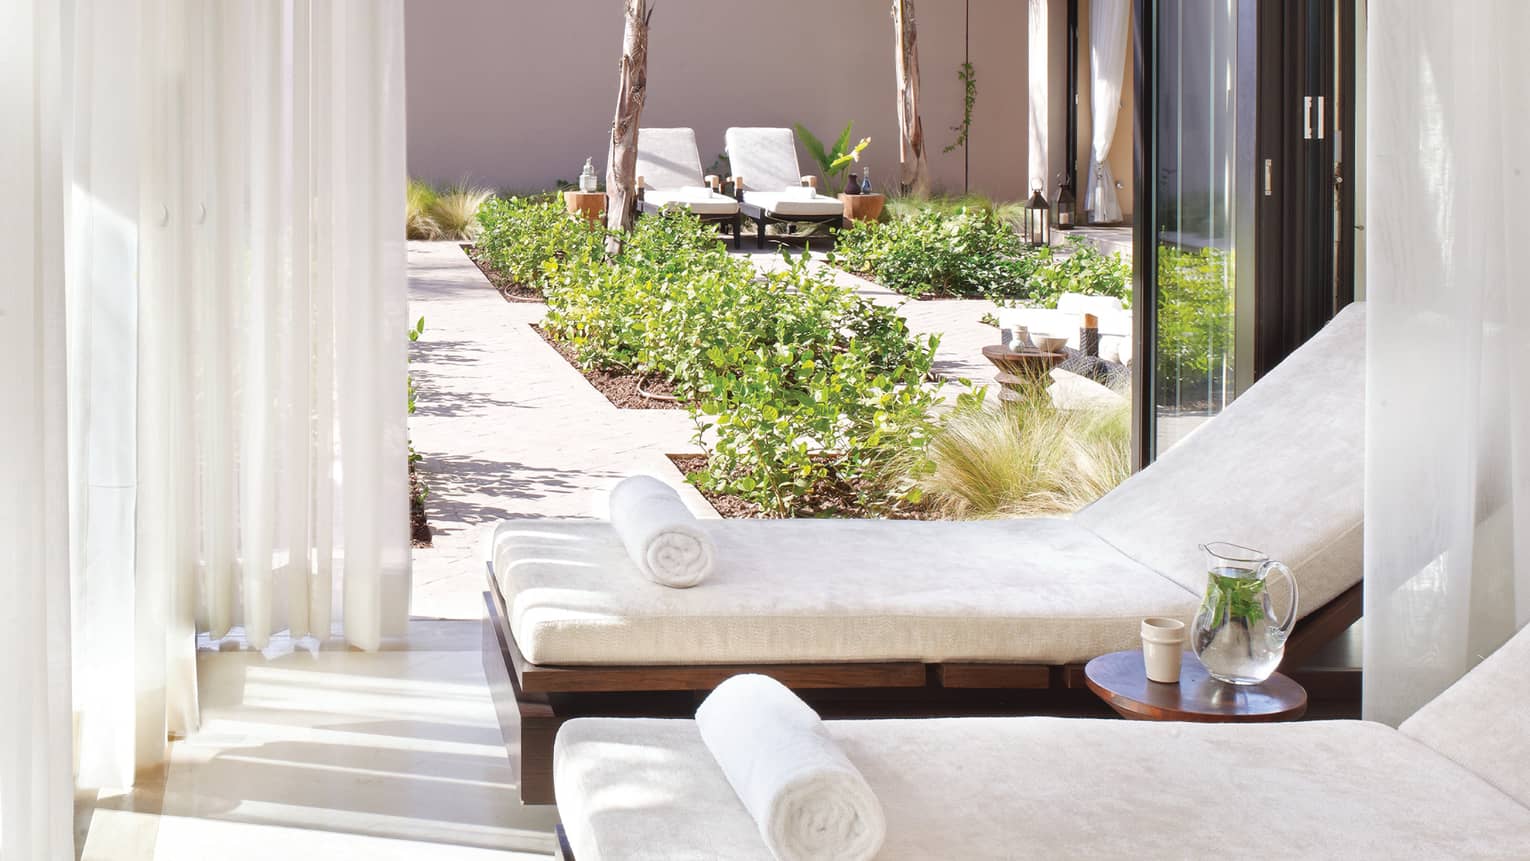 Two white lounge chairs in cabana on spa patio